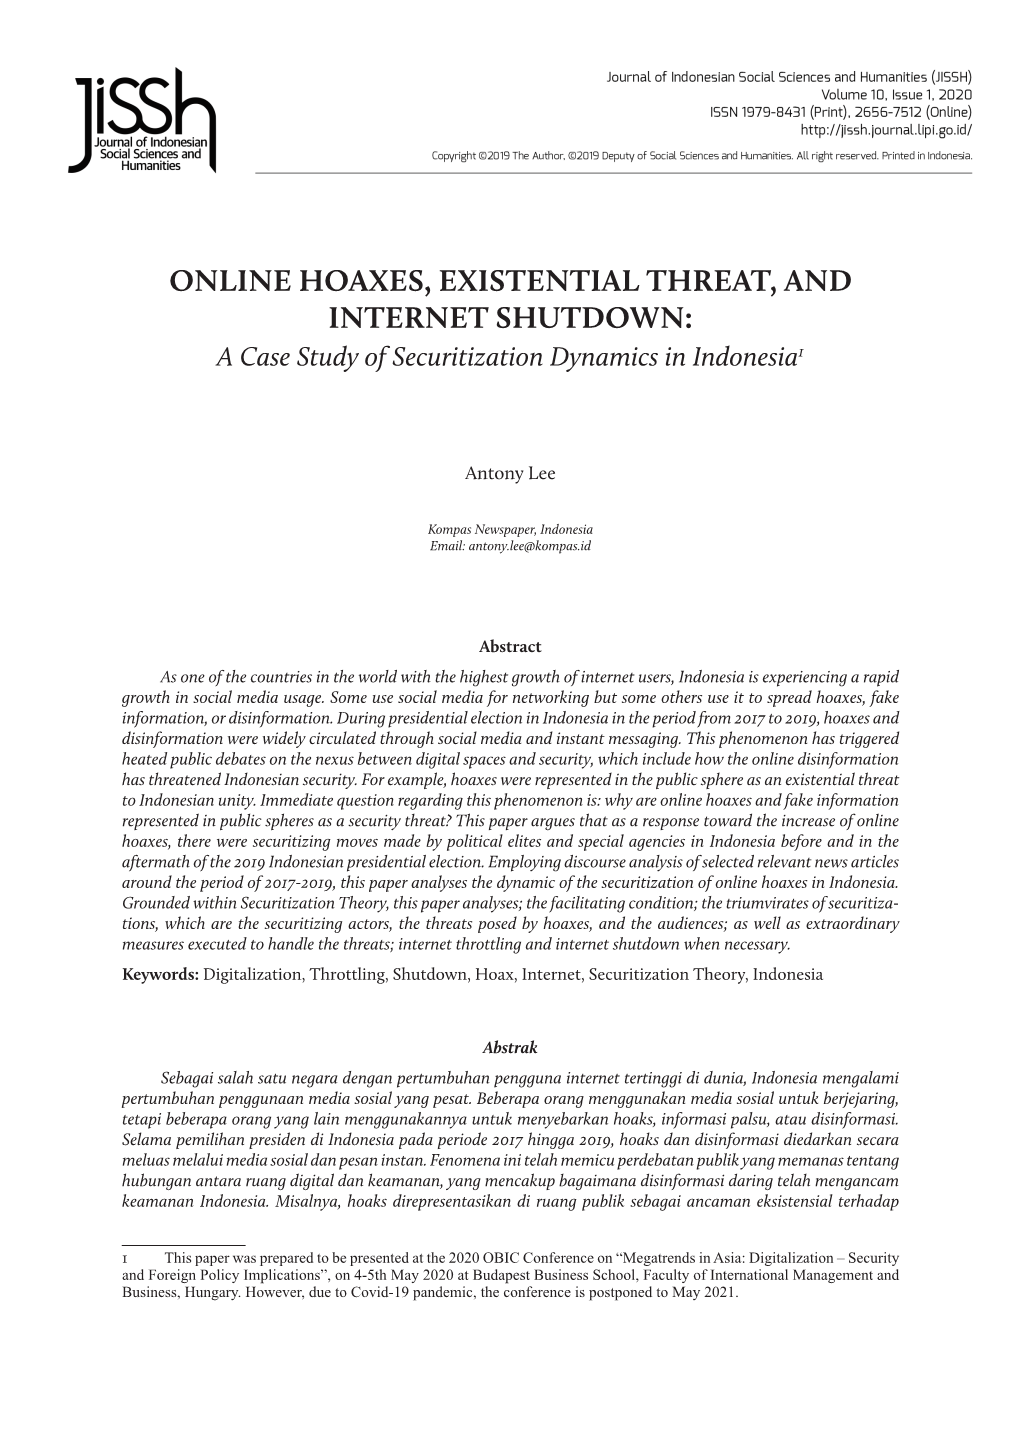 ONLINE HOAXES, EXISTENTIAL THREAT, and ­INTERNET SHUTDOWN: a Case Study of Securitization Dynamics in Indonesia1